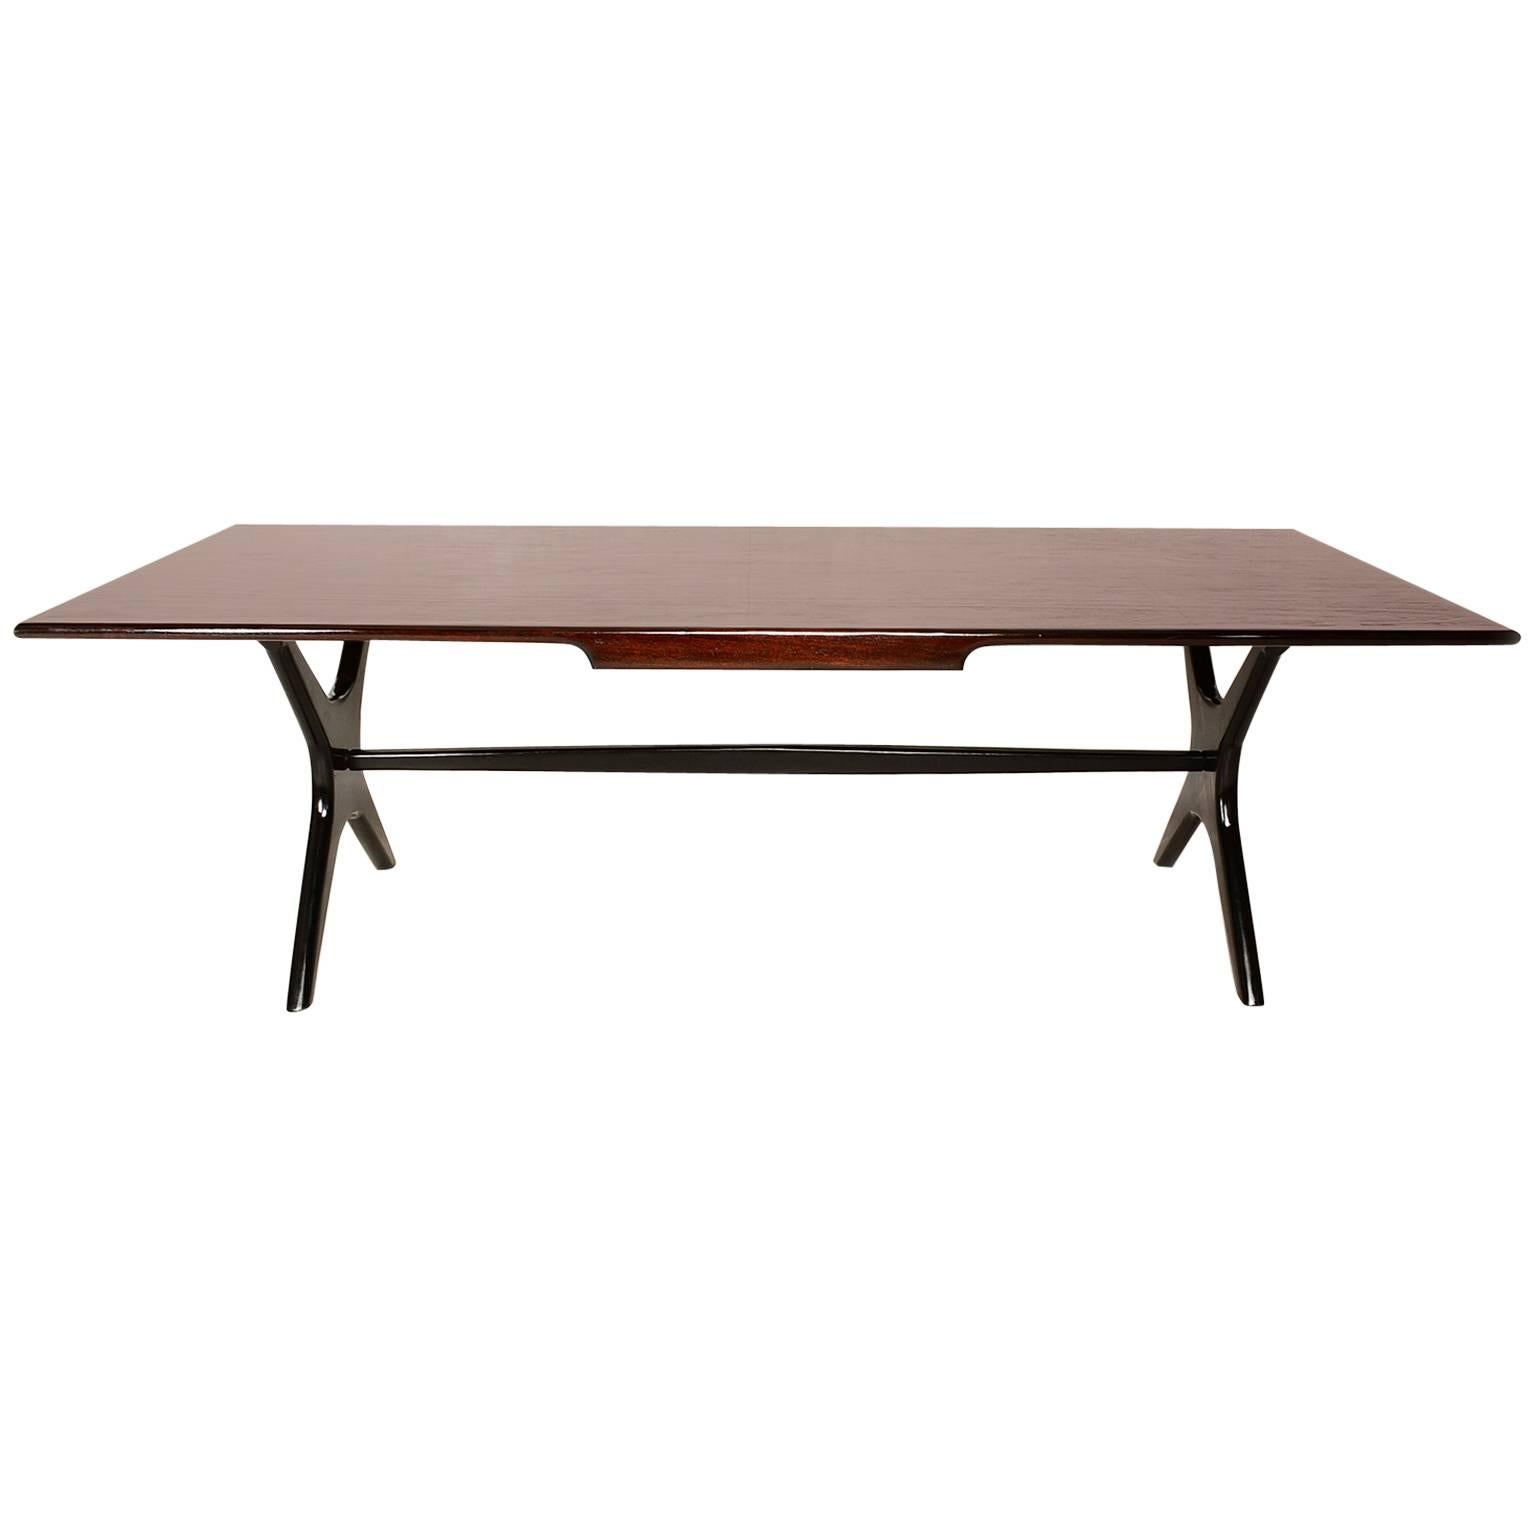 Mexican Modernist Dining Table with "X" Base